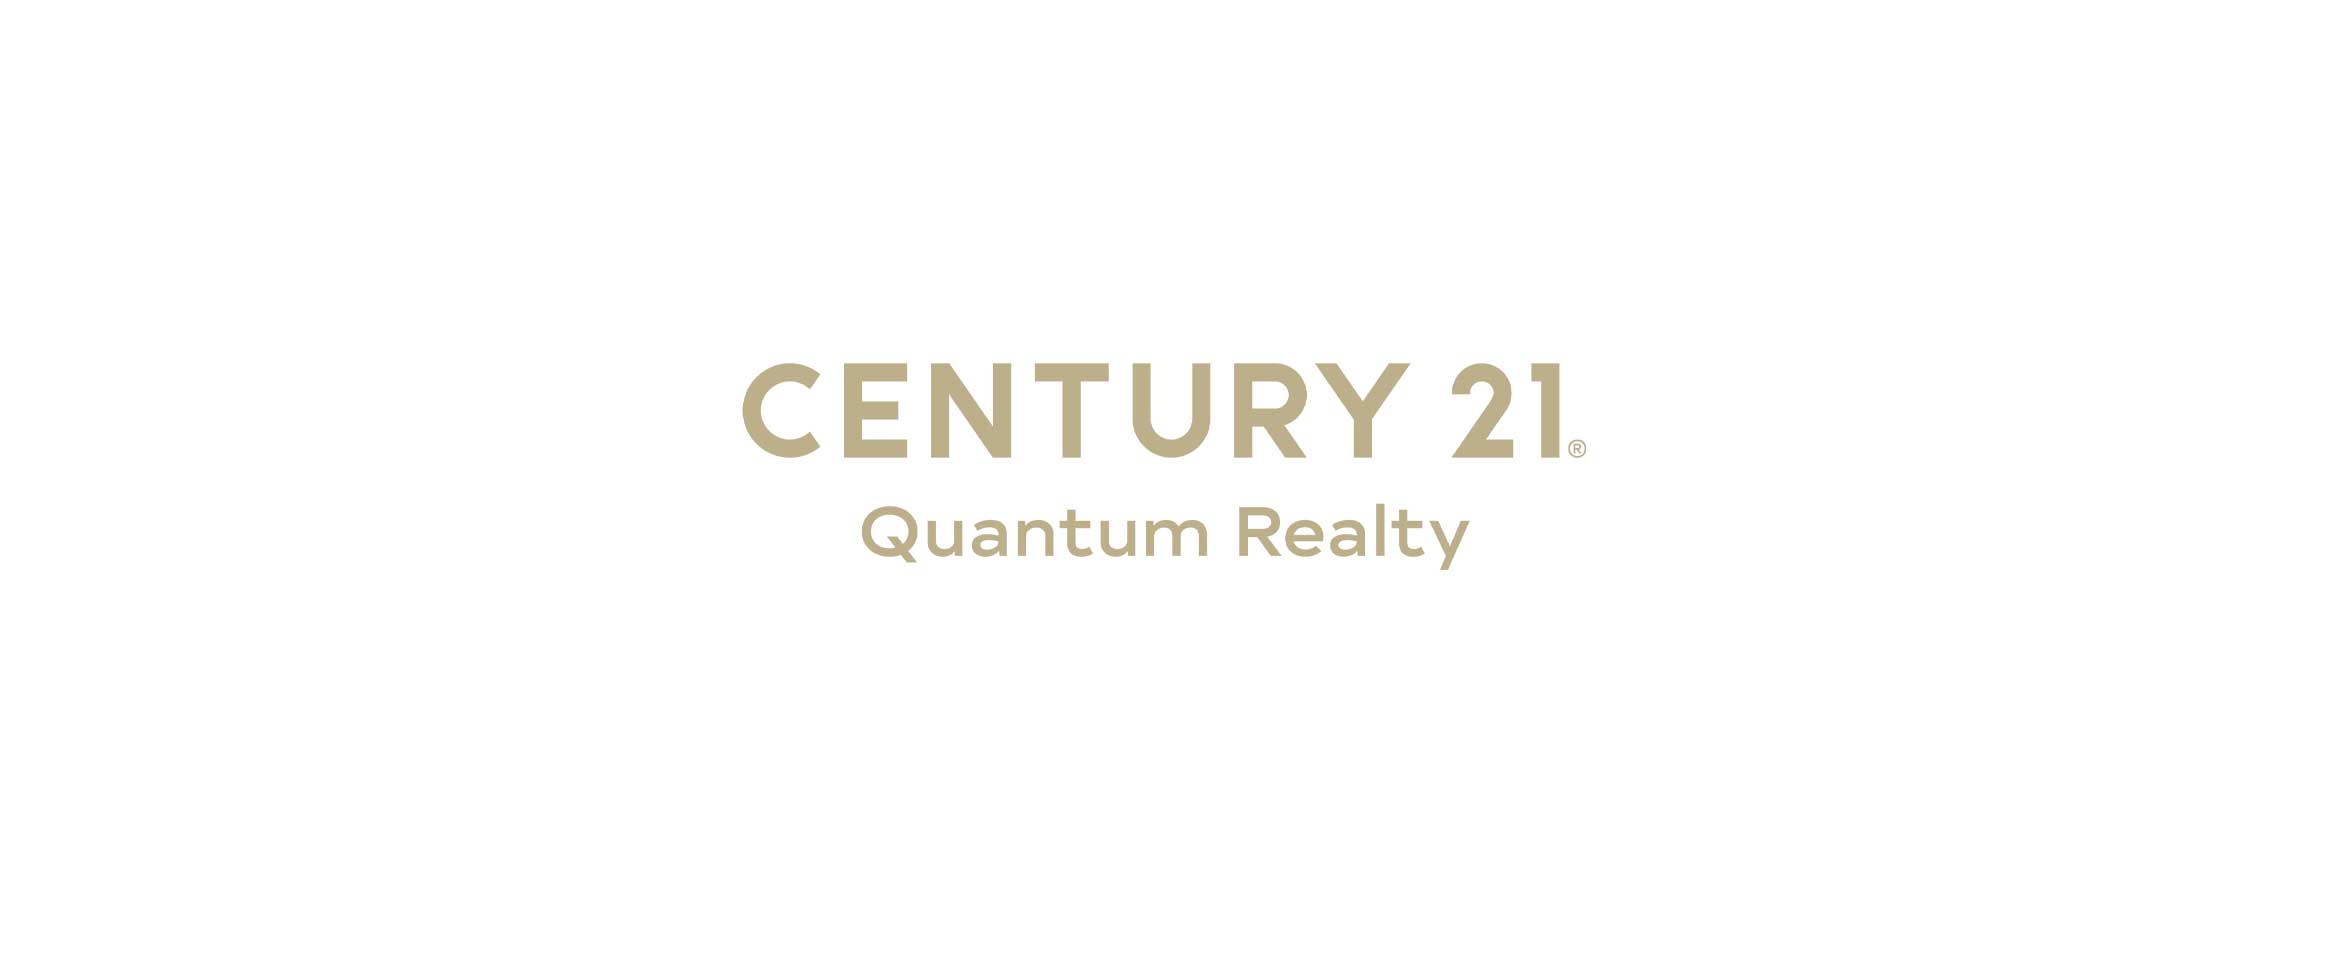 CENTURY 21 Quantum Realty aims to become a big part of Edmonton real estate